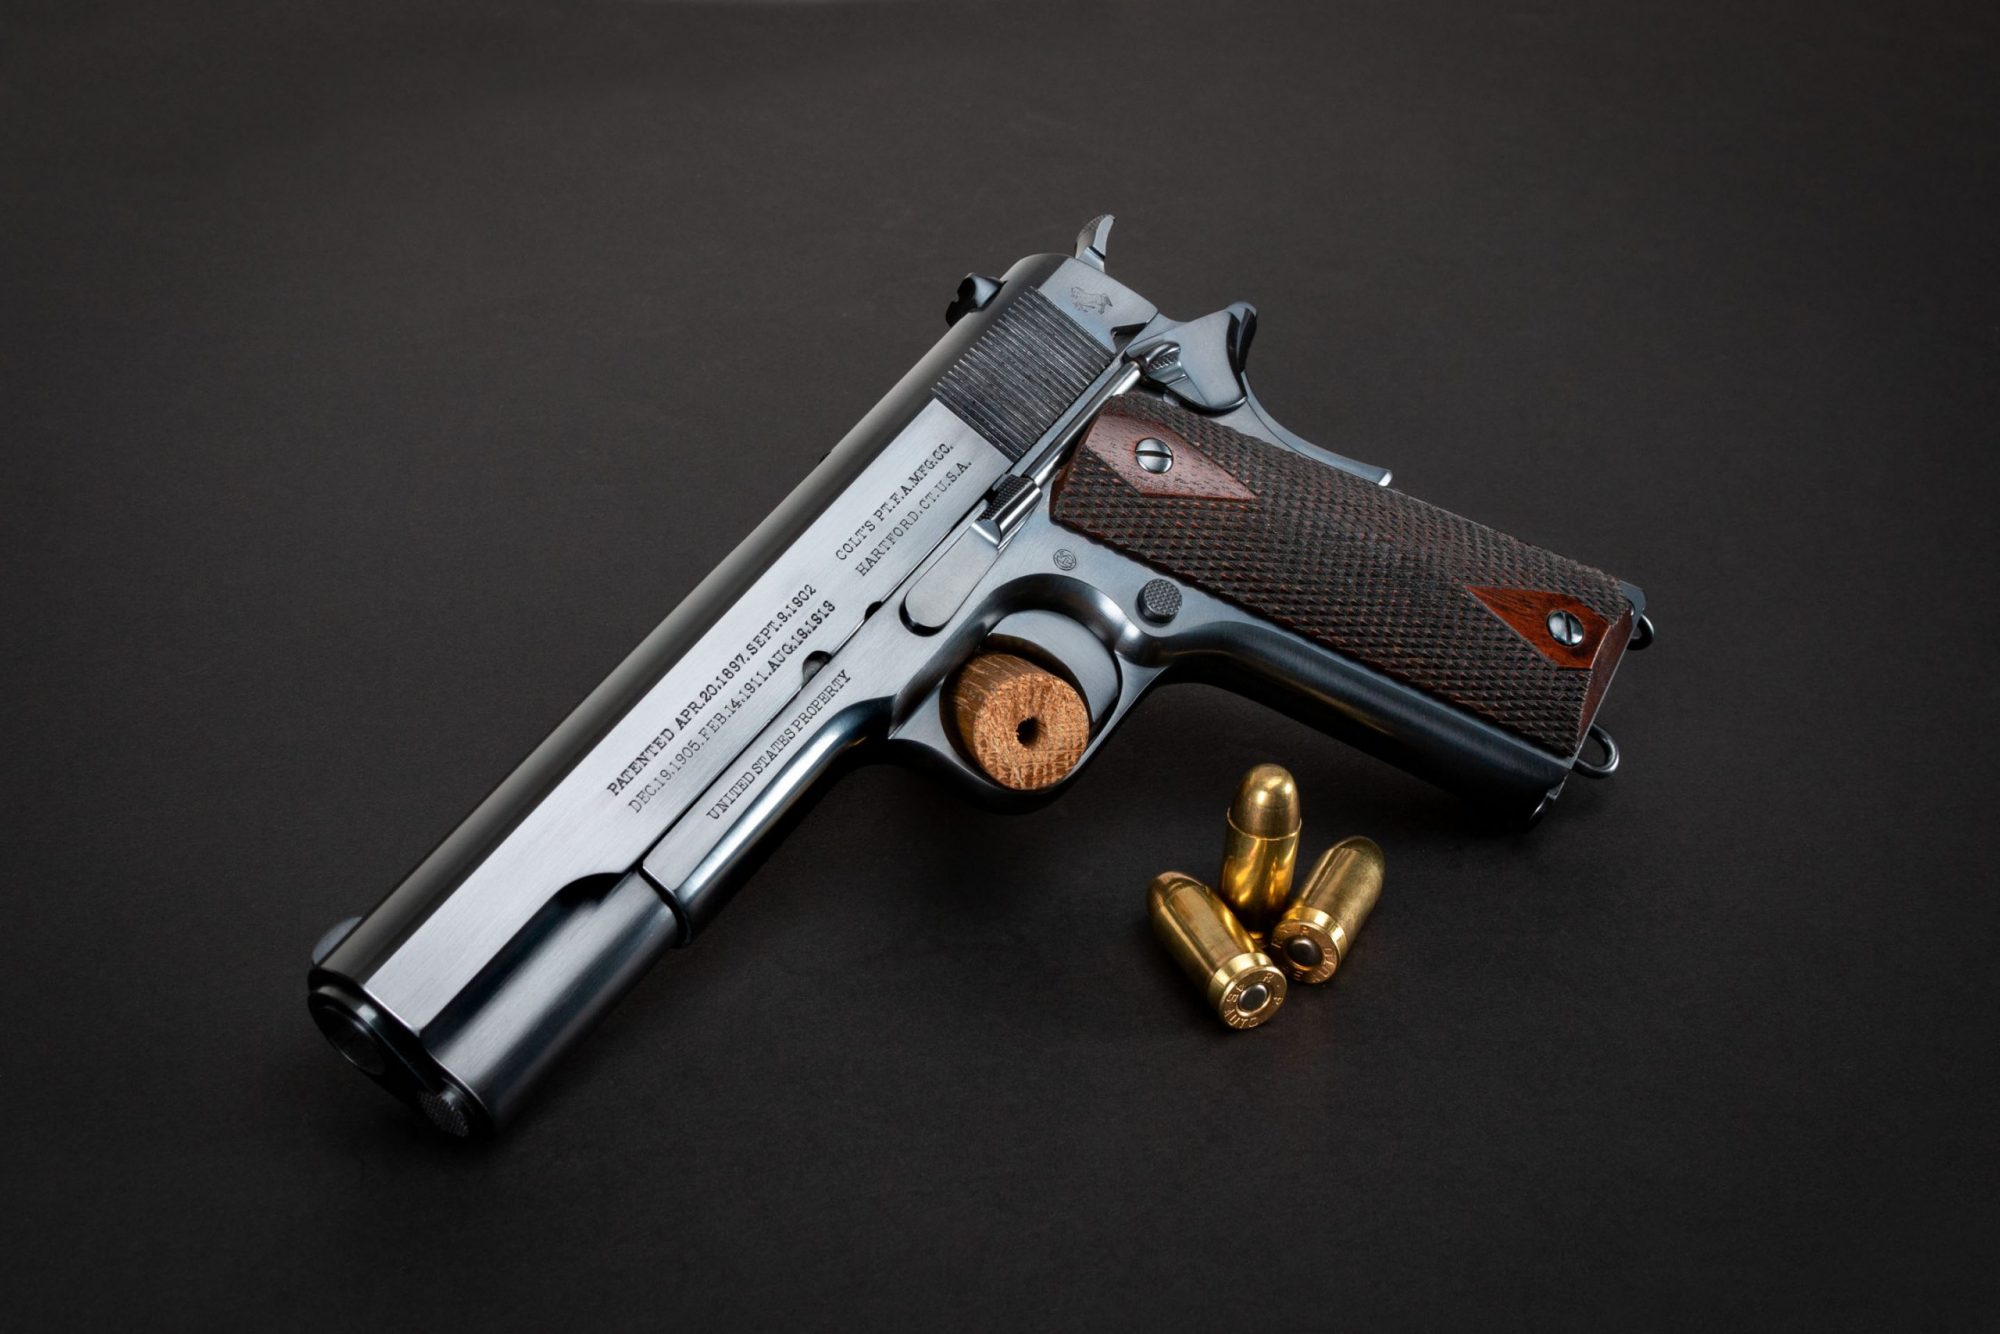 Photo of a restored Colt 1911 U.S. Army, restored by Turnbull Restoration of Bloomfield, NY